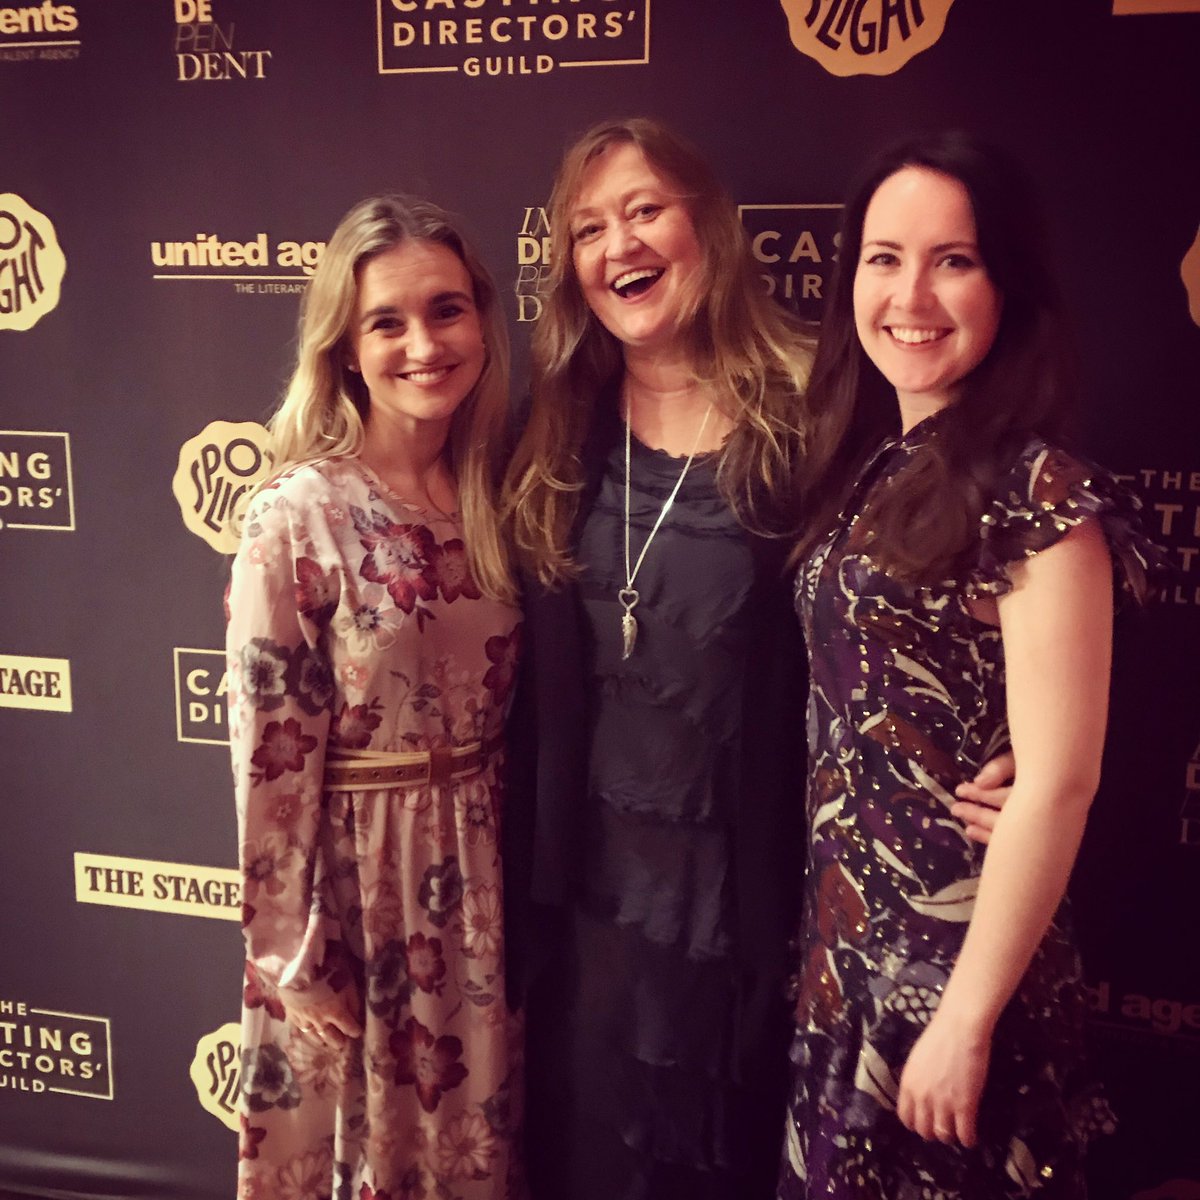 Team JGC celebrating at the first ever #CDGAwards2019 last night. What a fabulous evening @CDGNews @SpotlightUK @Ham_Yard! @amy_bea @heidi_lawry 🌟 (huge shout out to Heidi and @BN_Casting being nominated in the Best Casting in a Commercial category!!)